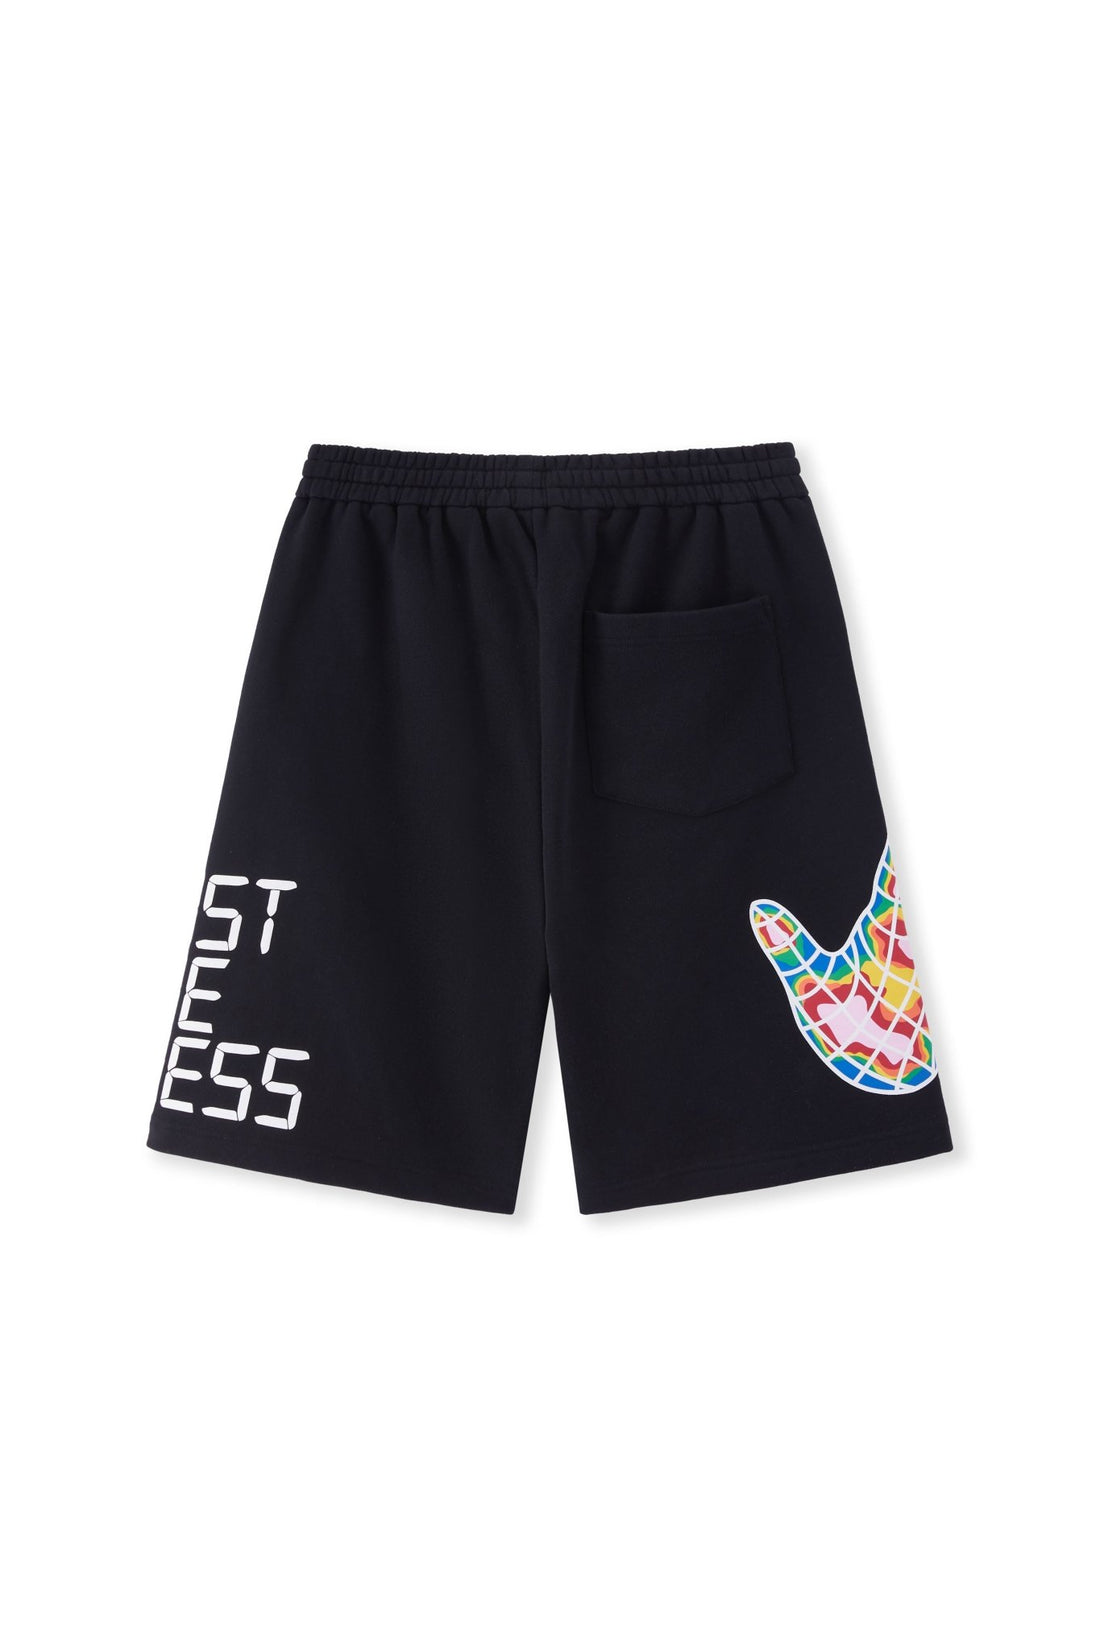 TRUST THE PROCESS SHORTS BLACK Acupuncture